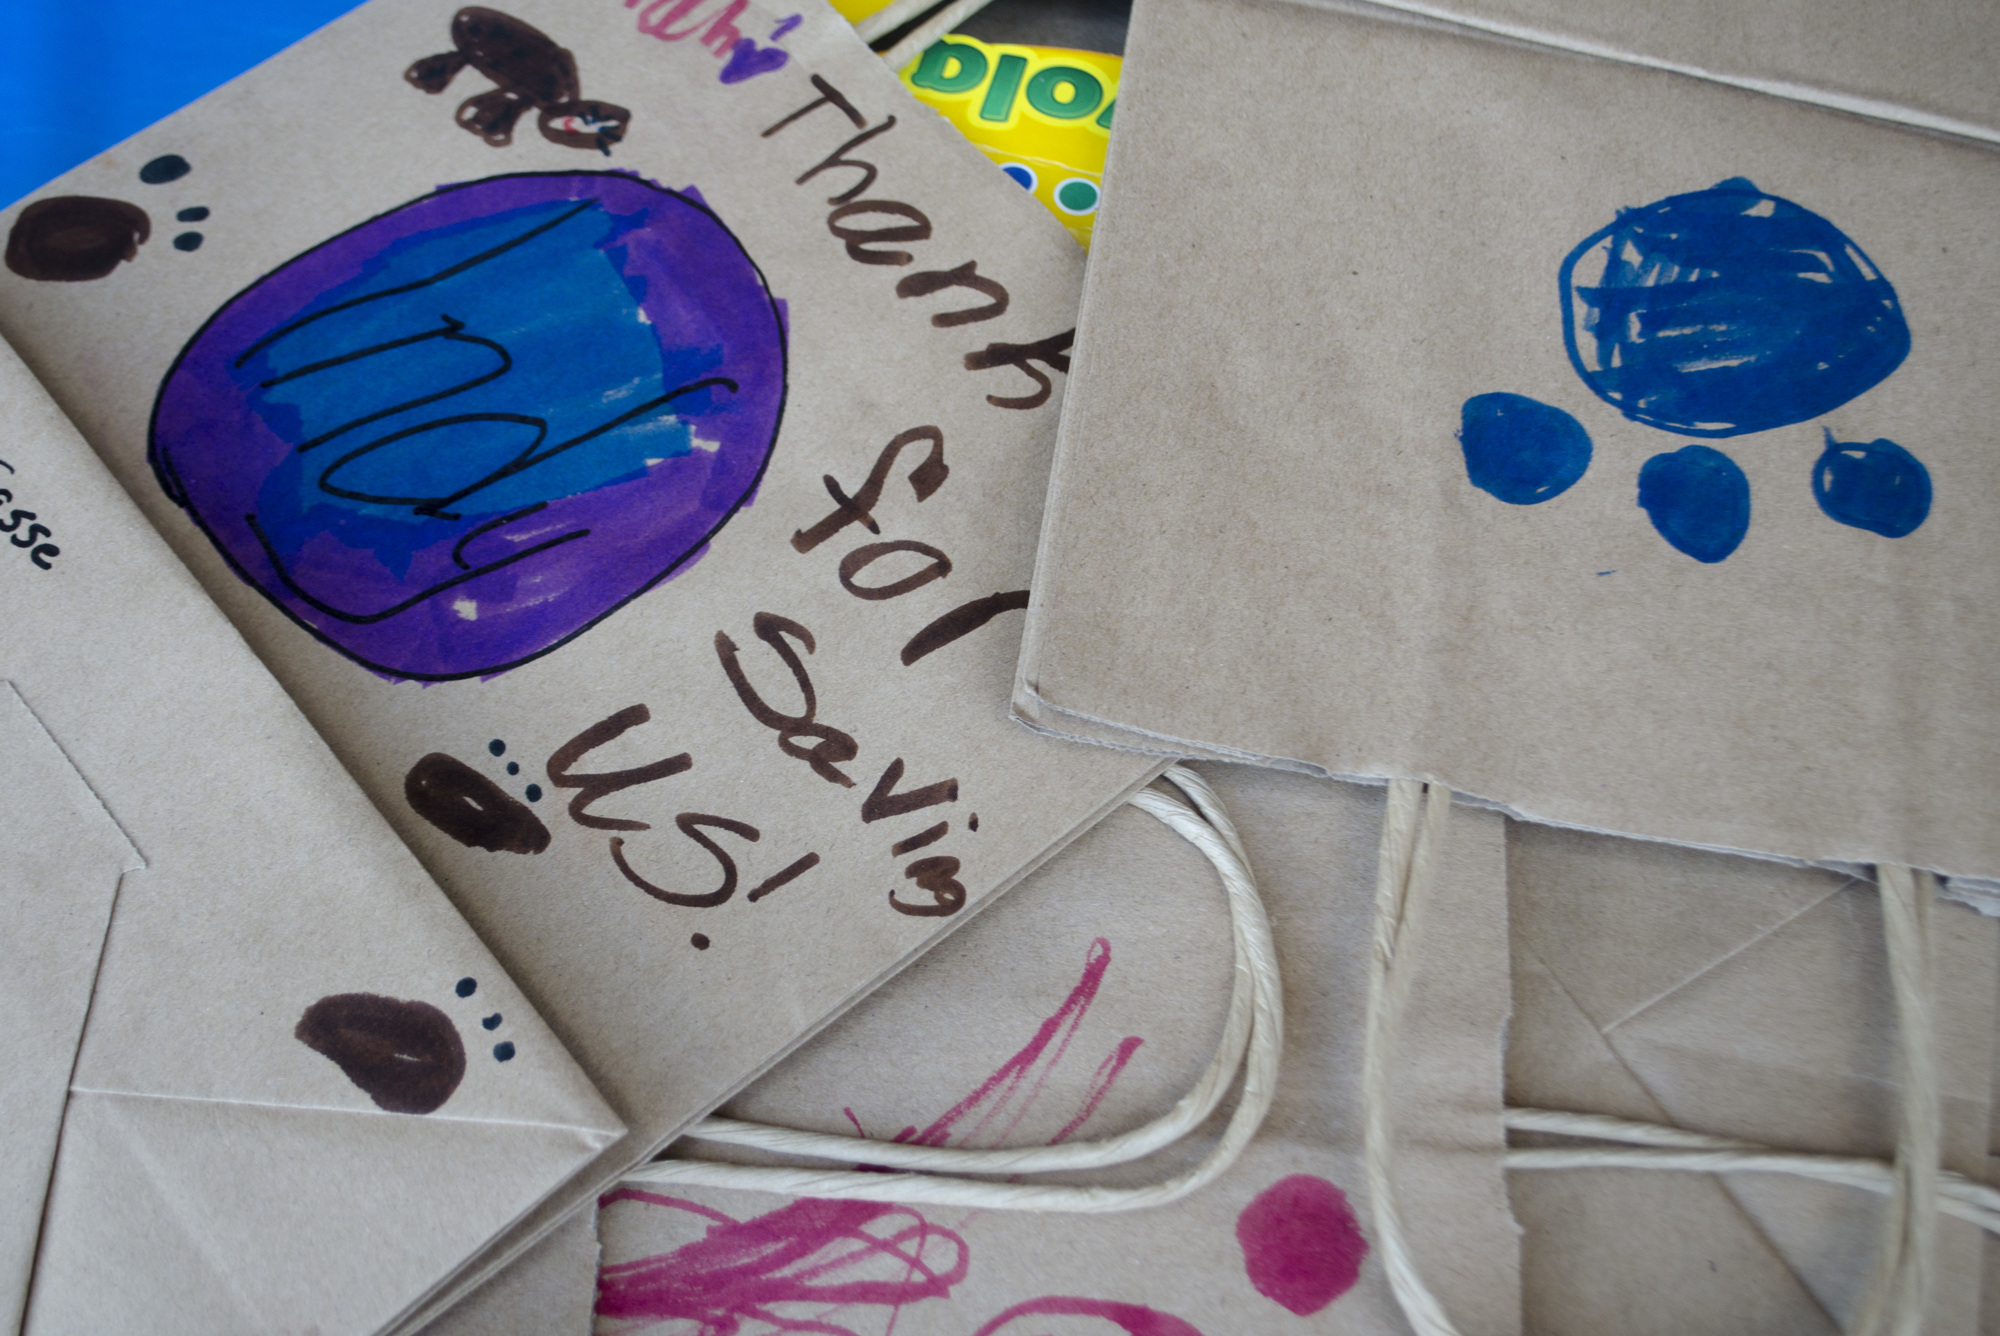 Children at the K-9 Pawty decorated doggy bags for the Sheriff’s Office’s K-9 deputies.